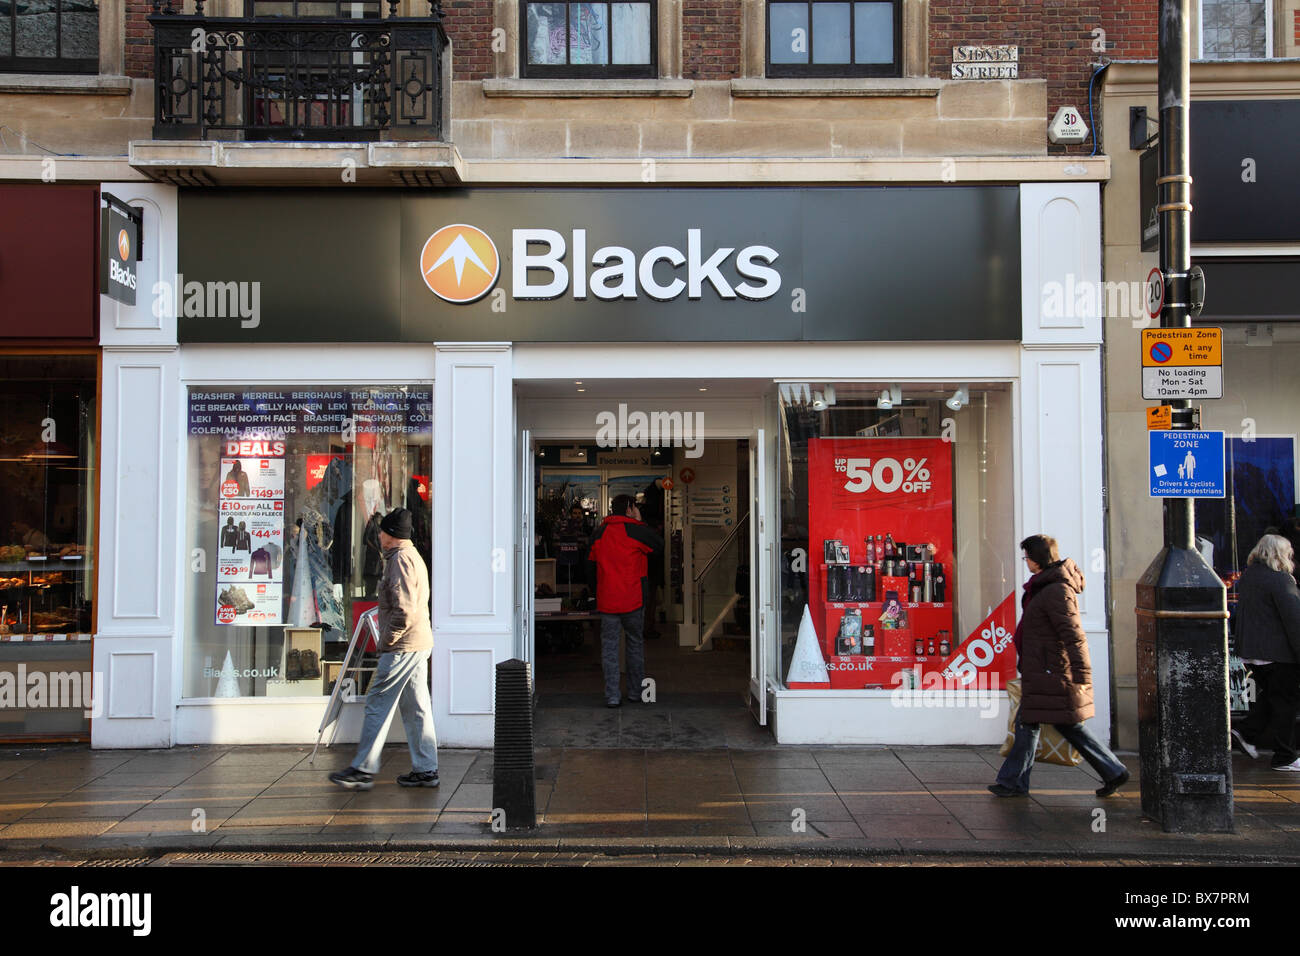 Blacks Store High Resolution Stock Photography and Images - Alamy